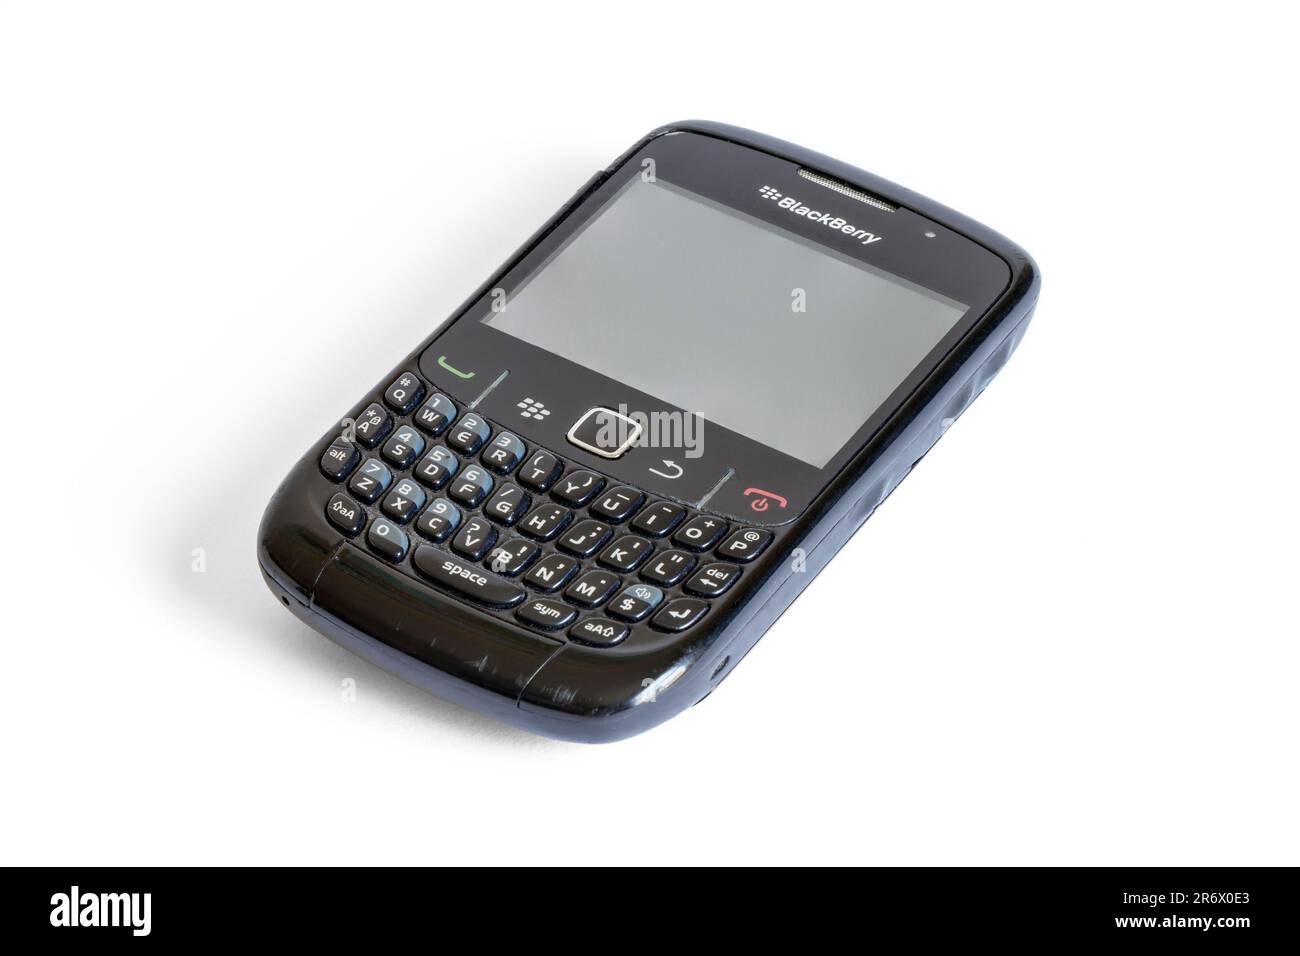 2010 Blackberry Curve 8520 mobile phone, isolated on a white background, UK Stock Photo